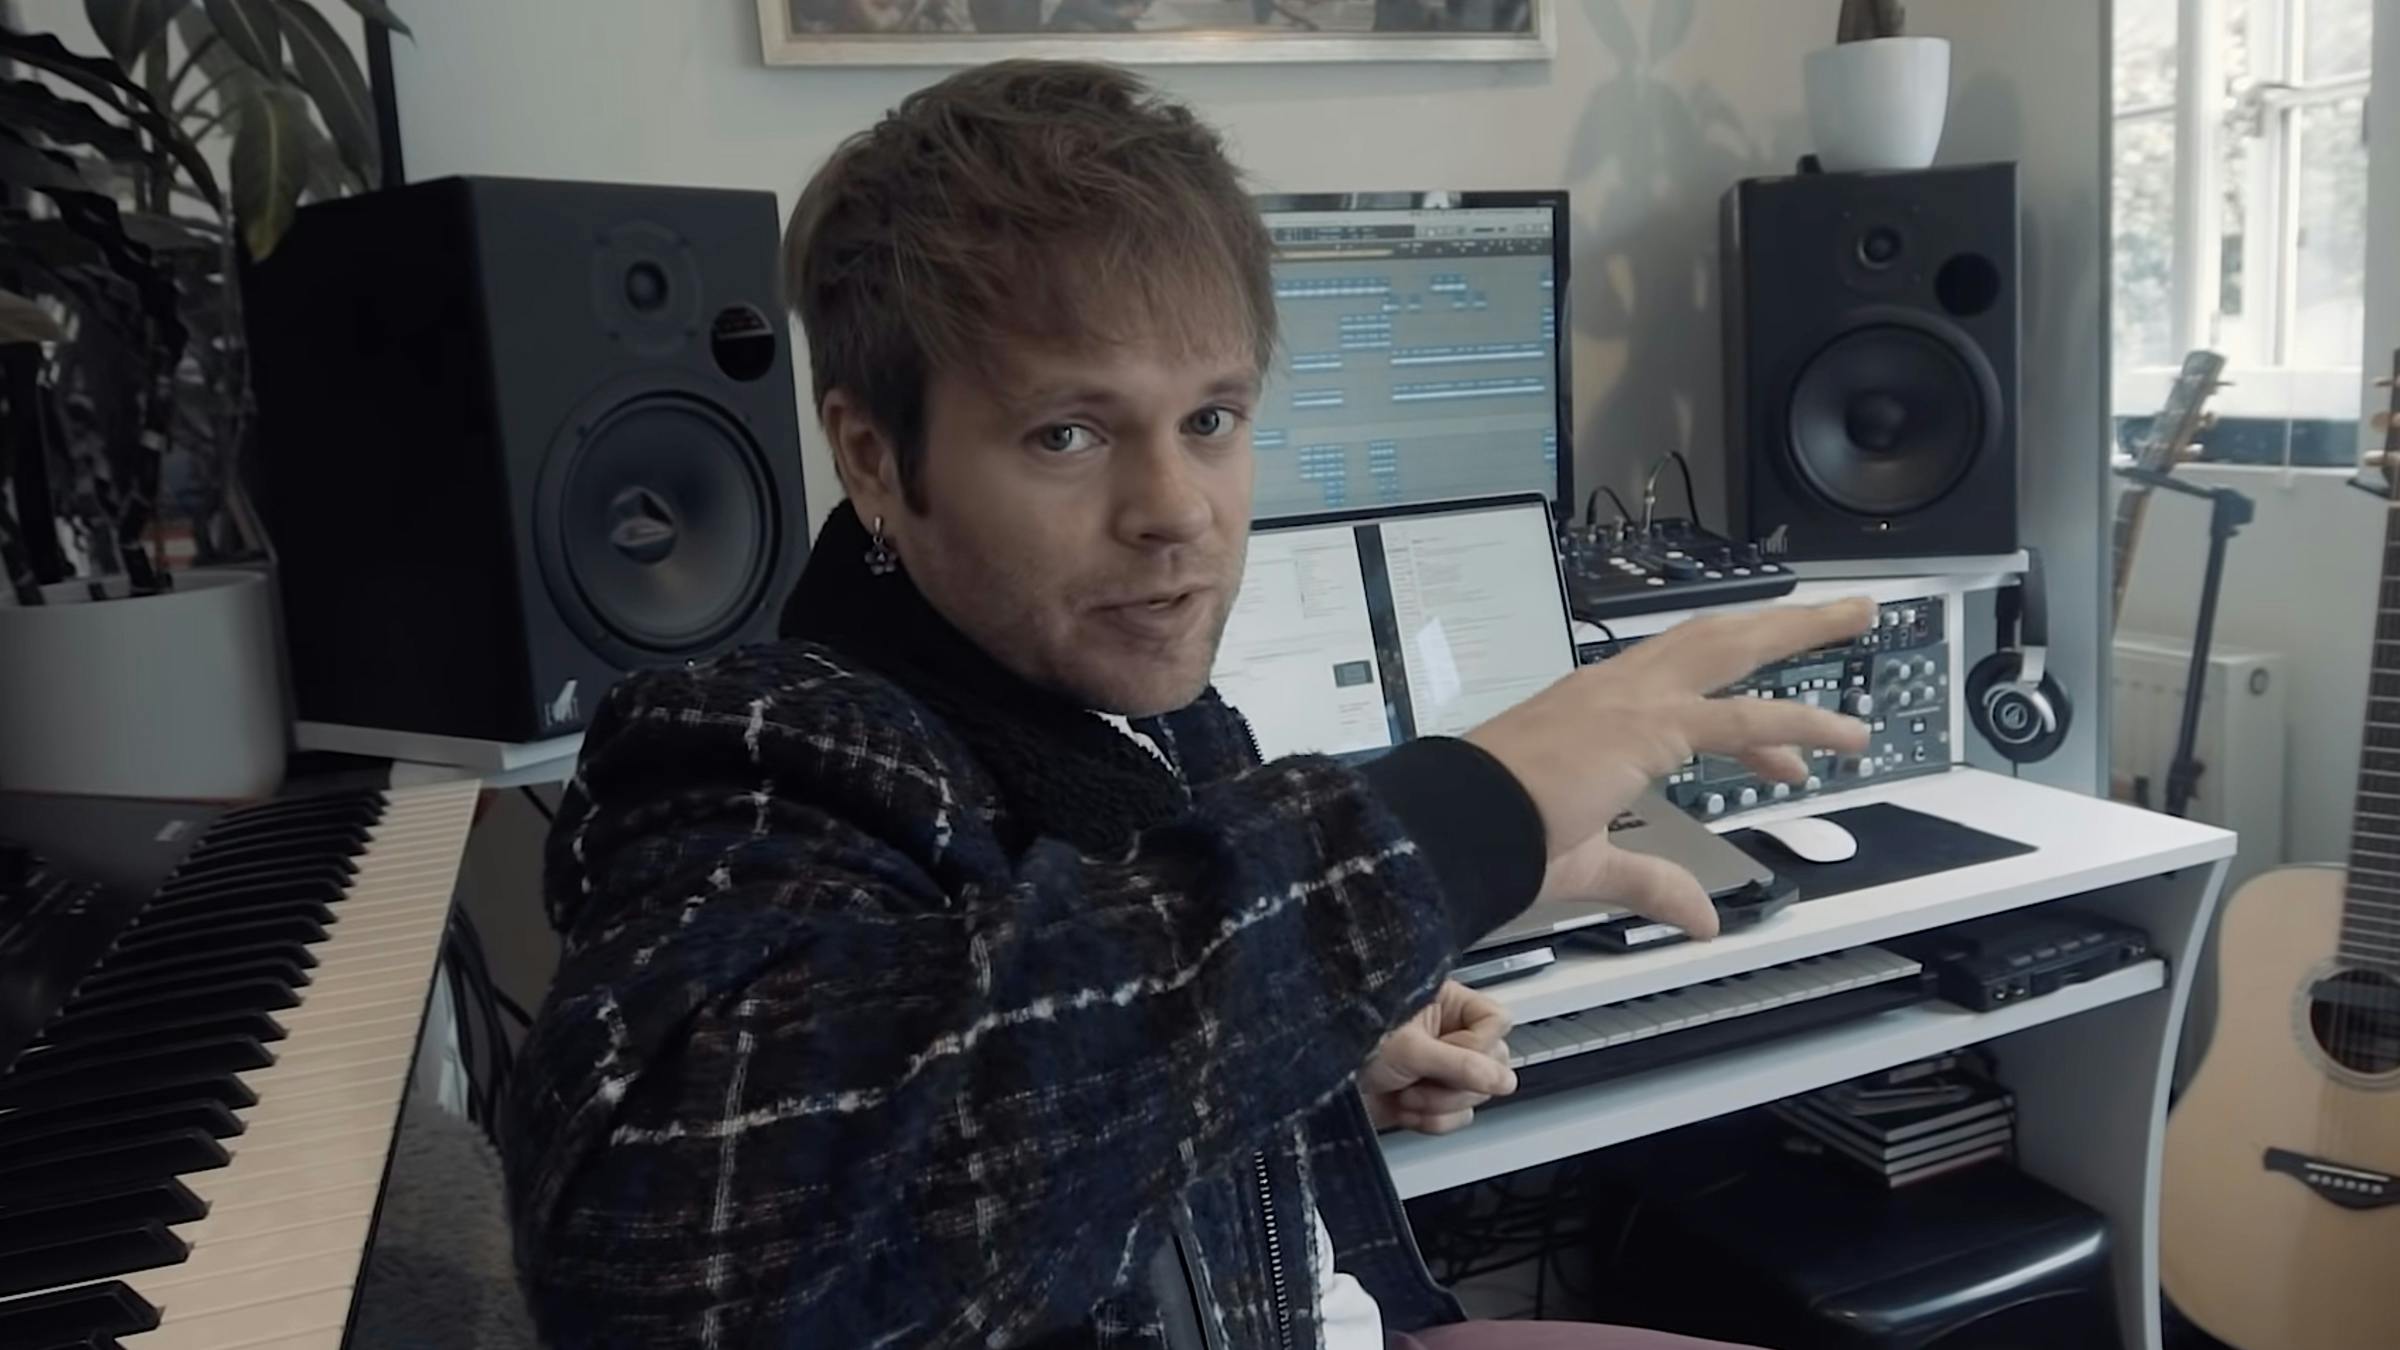 Watch the first instalment of Enter Shikari's new four-part documentary mini-series